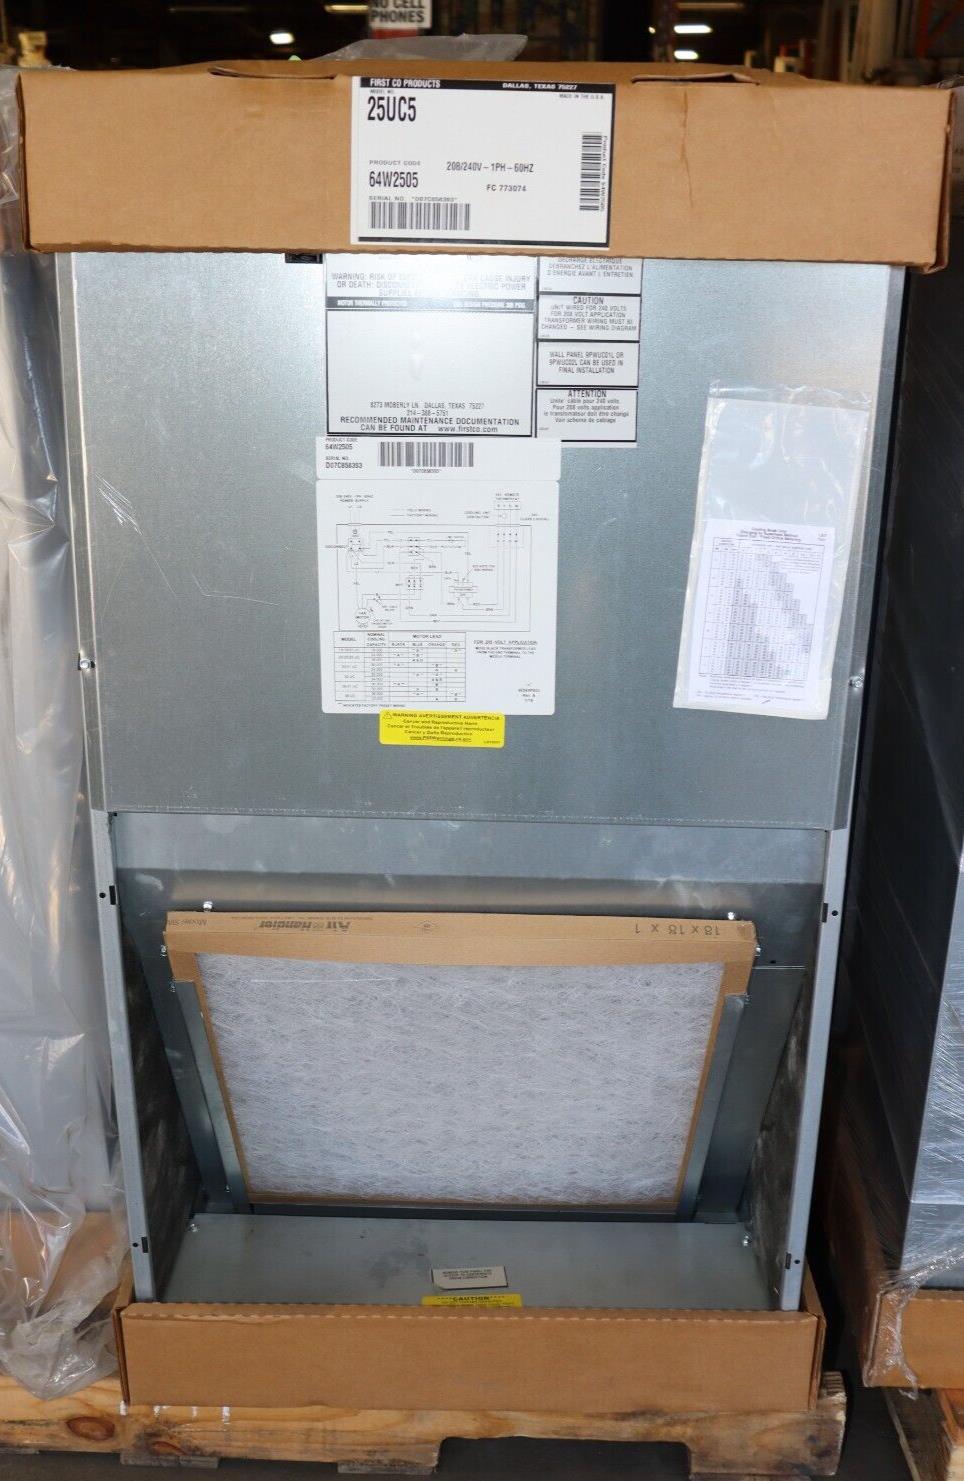 2 Ton Air Handler Electric Wall Closet Recessed Up Flow First Co 25UC5 with 5kW Heat Strip